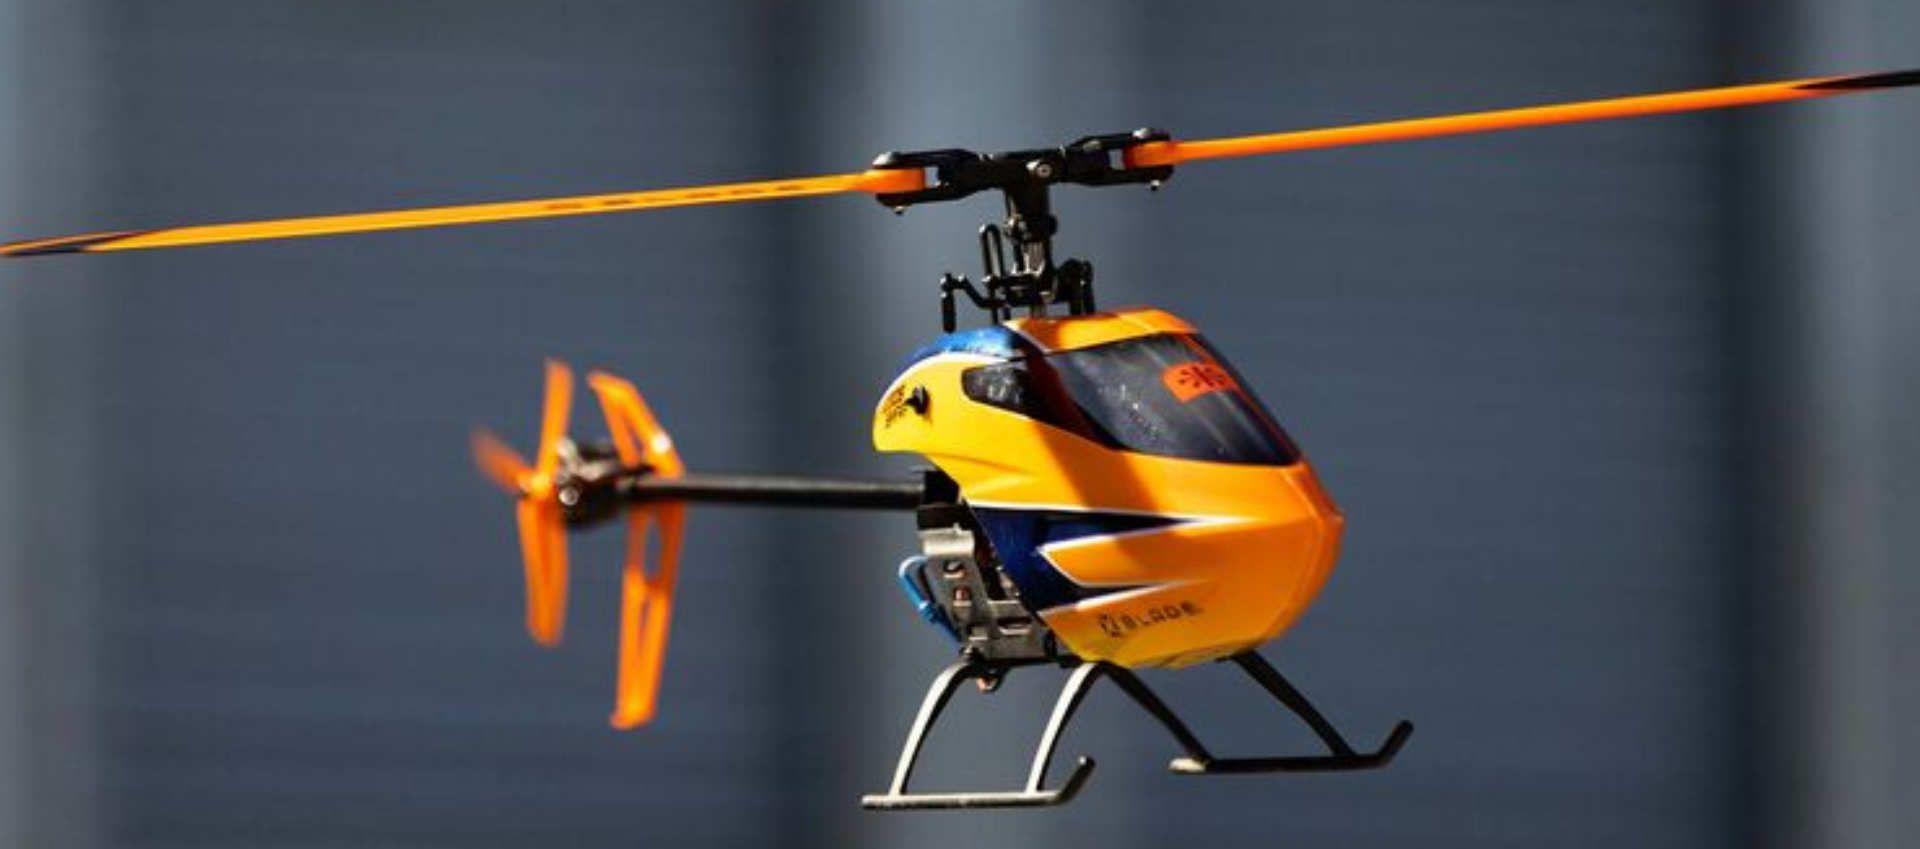 Heli Rc Shop: Choose the perfect helicopter from our diverse selection at the heli RC shop